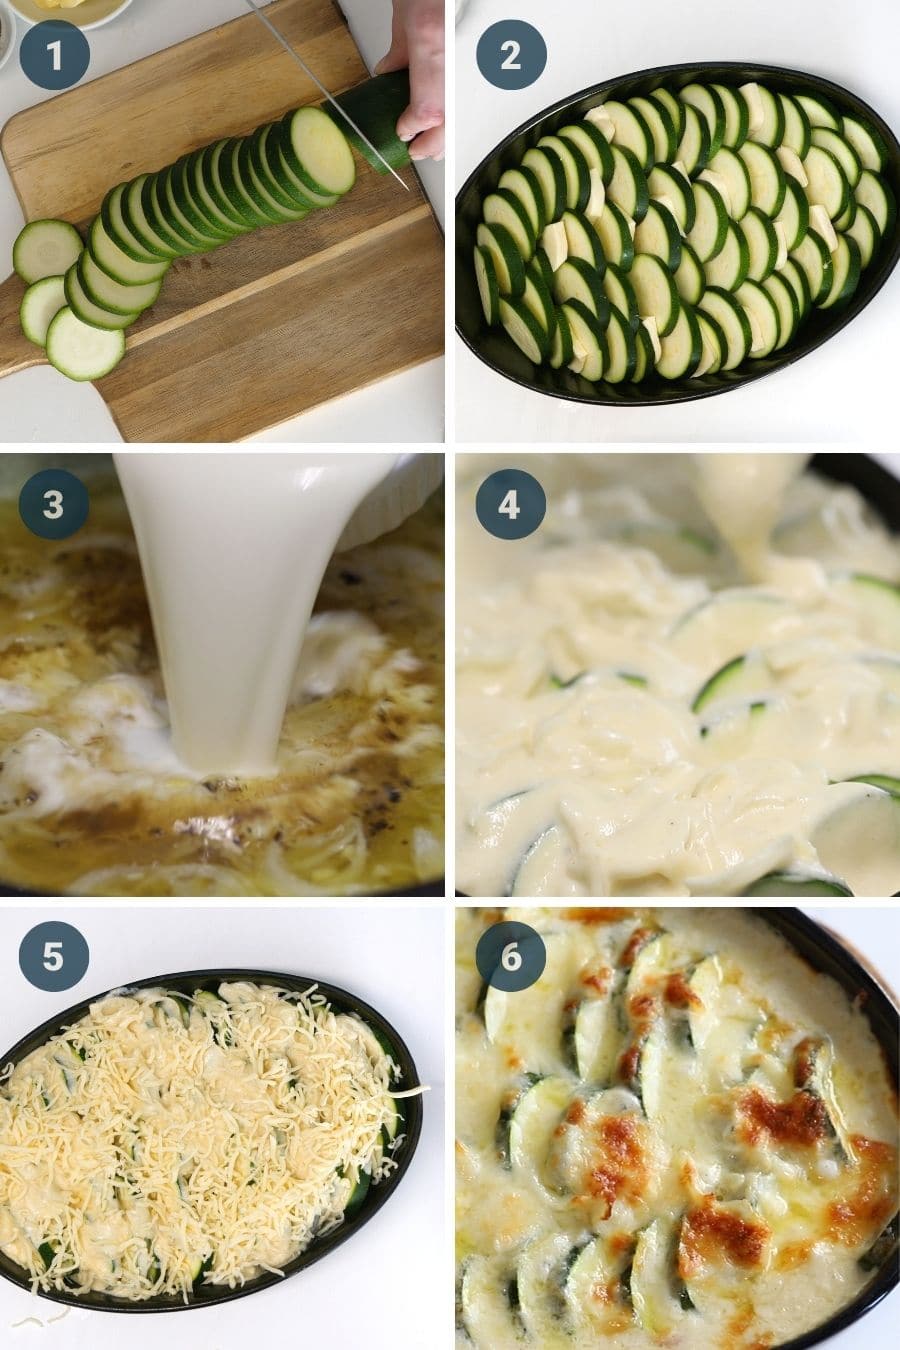 how to make zucchini casserole step by step